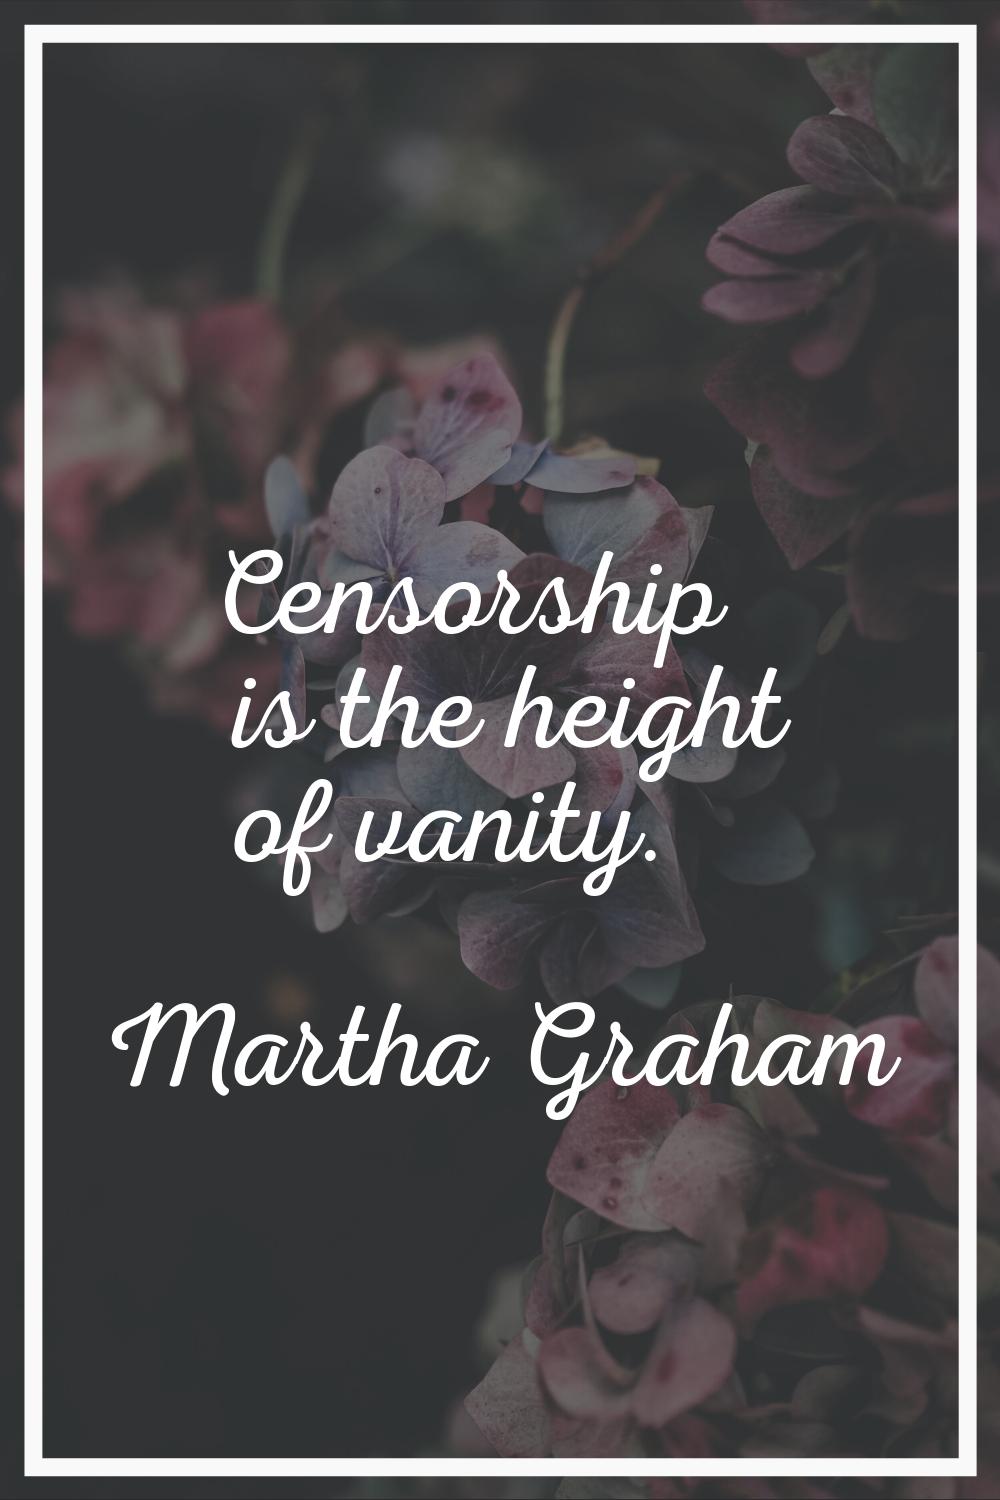 Censorship is the height of vanity.